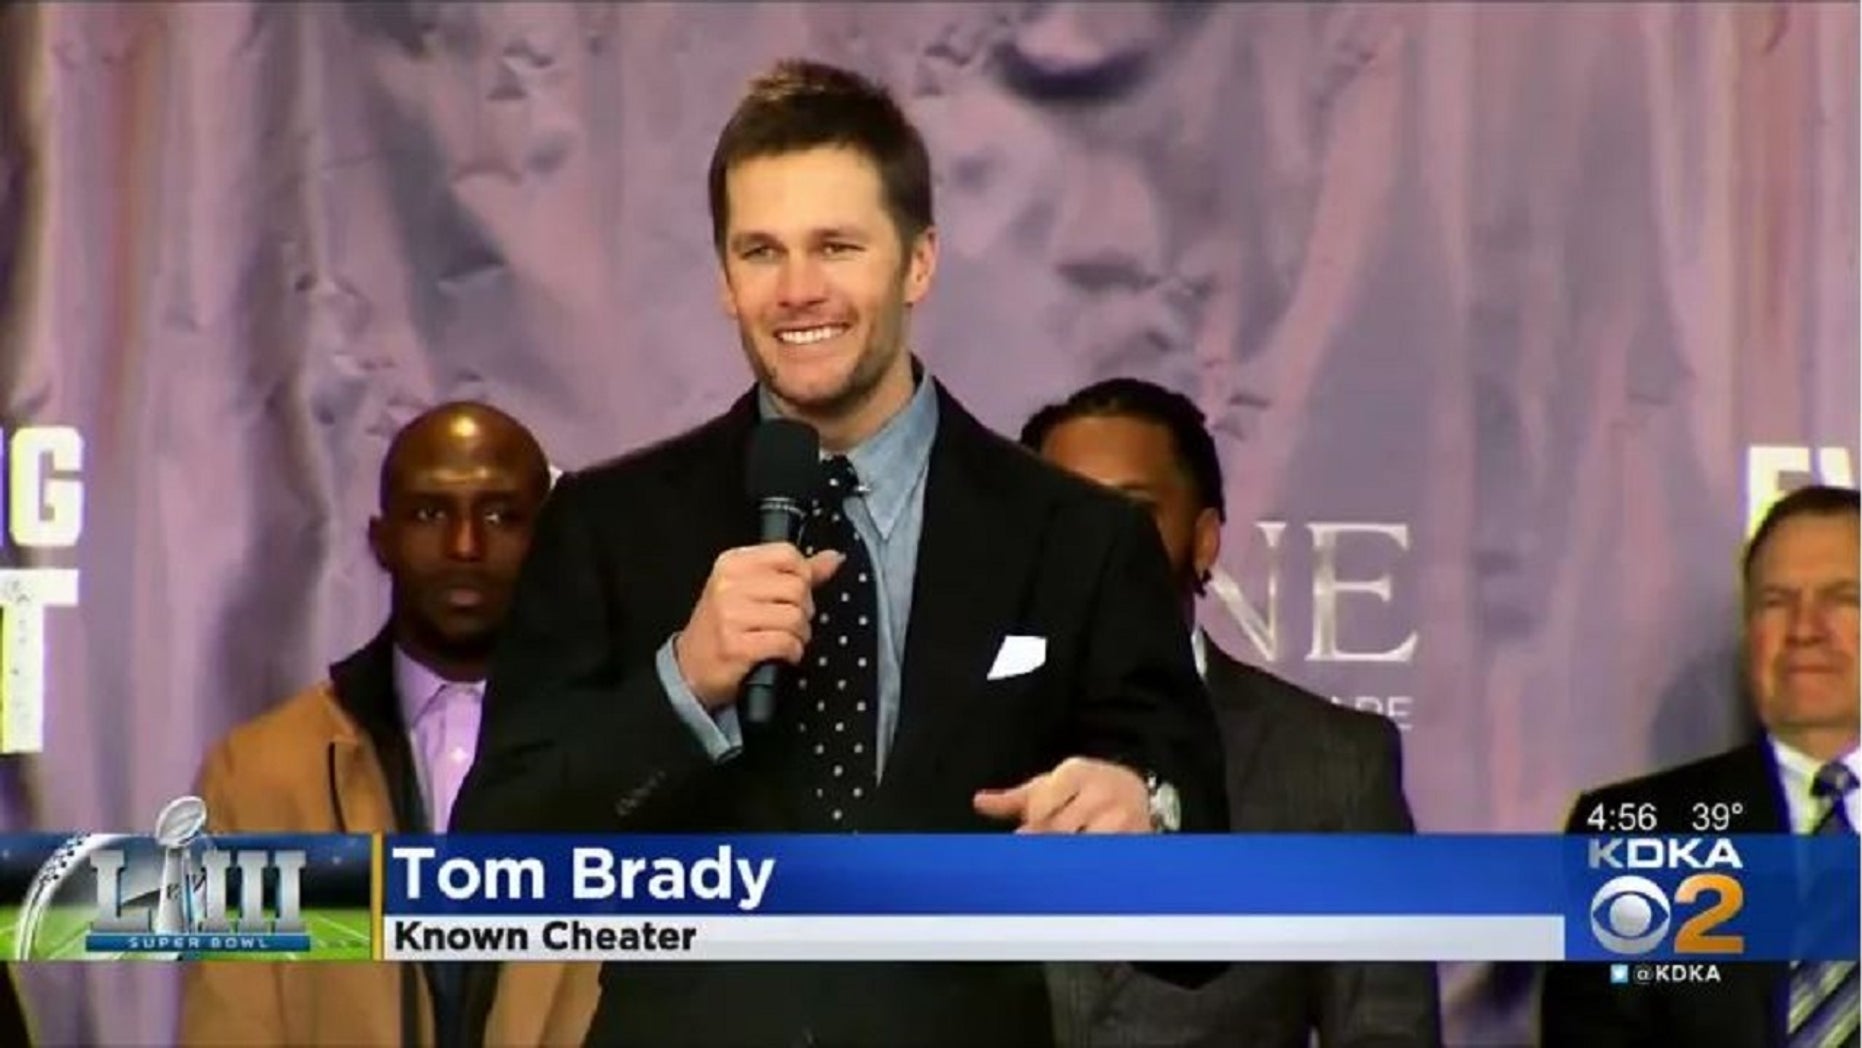 TV producer fired over Tom Brady graphic, says ‘it was a little wink’ to Steelers fans